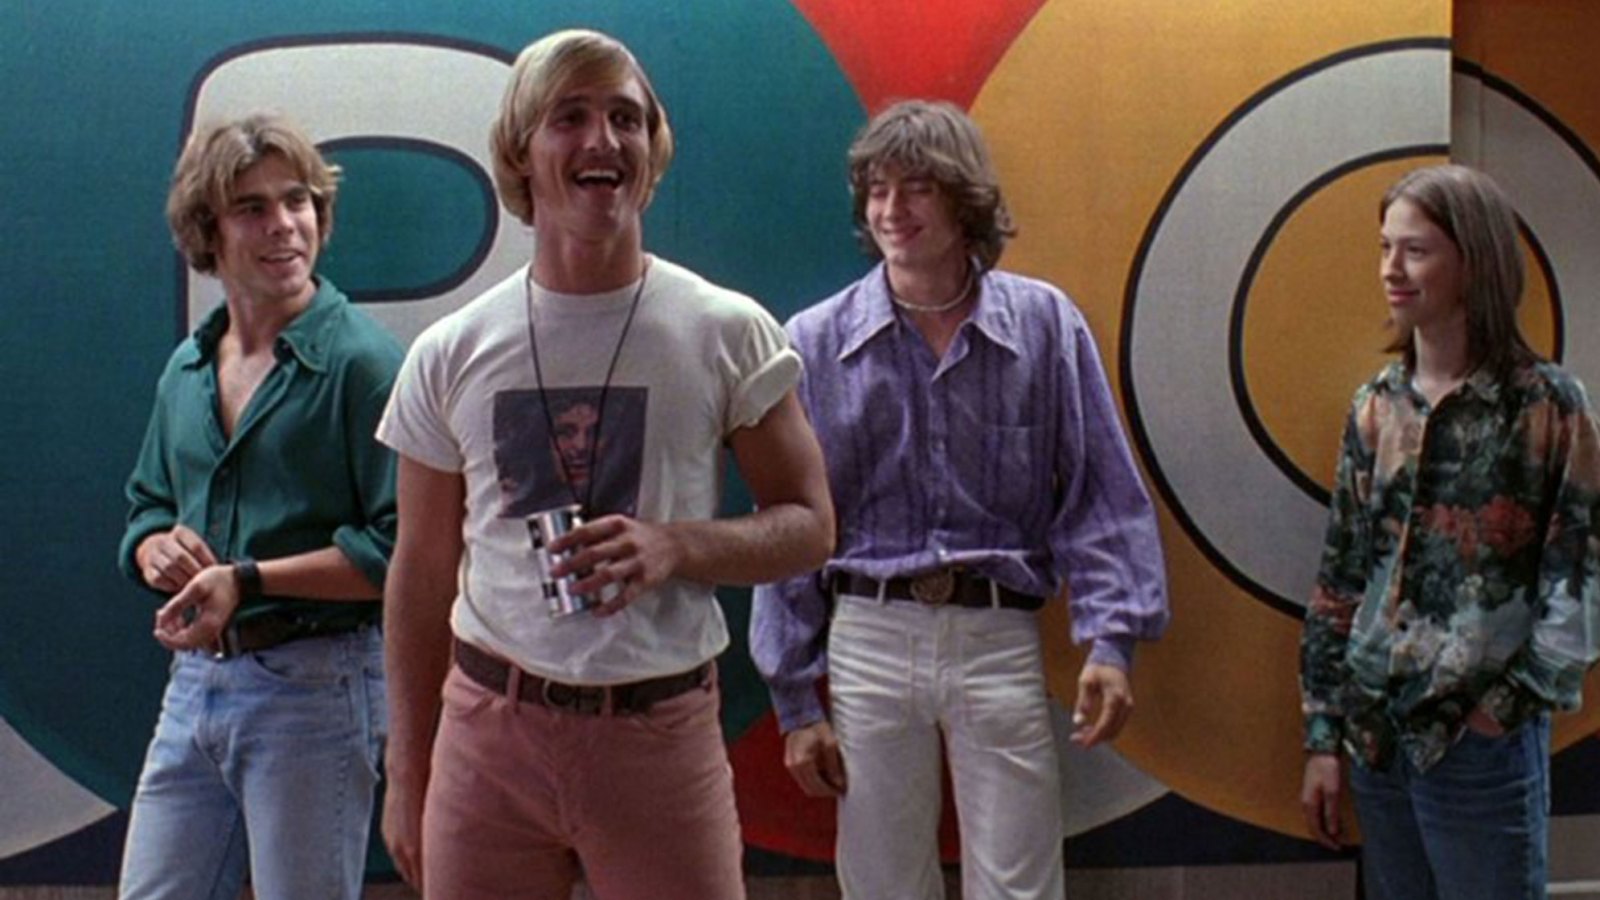 Matthew McConaughey in "Dazed and Confused"